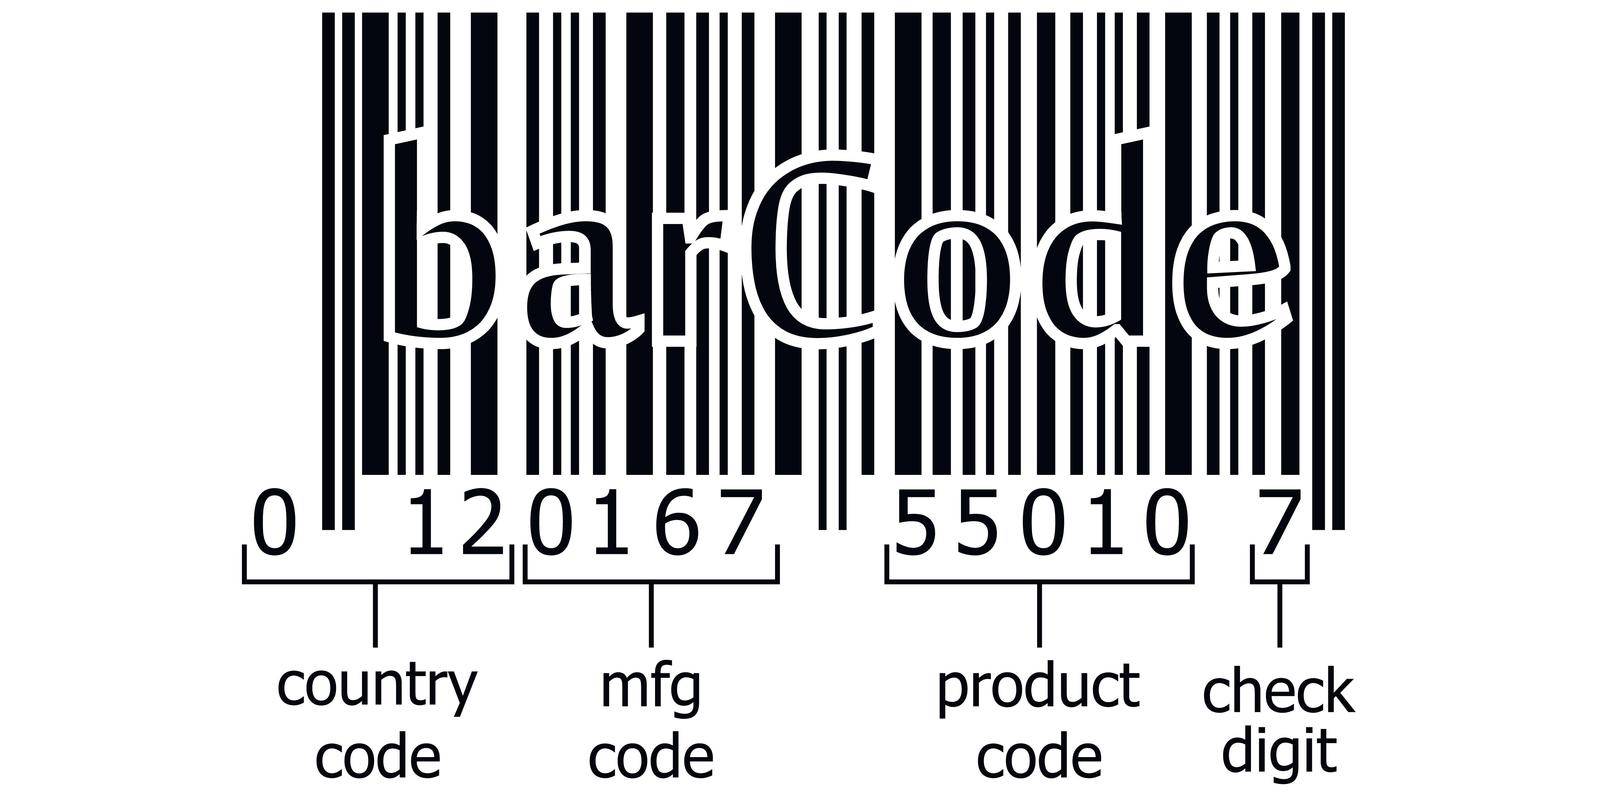 decoding numeric code barcode symbol decoding the numbers on the bar, code, vector template